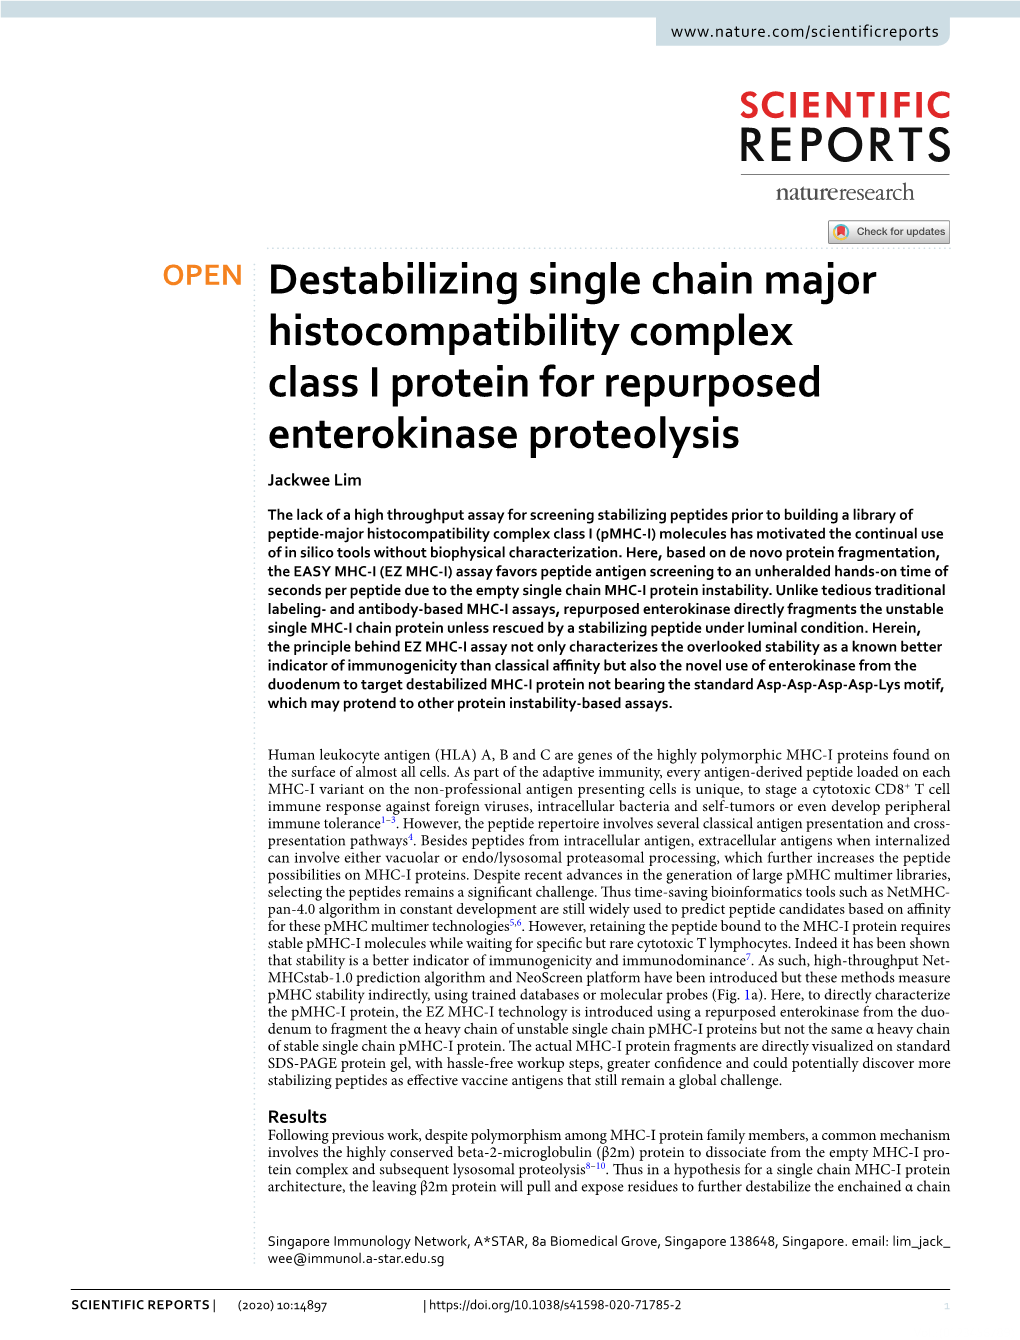 Destabilizing Single Chain Major Histocompatibility Complex Class I Protein for Repurposed Enterokinase Proteolysis Jackwee Lim